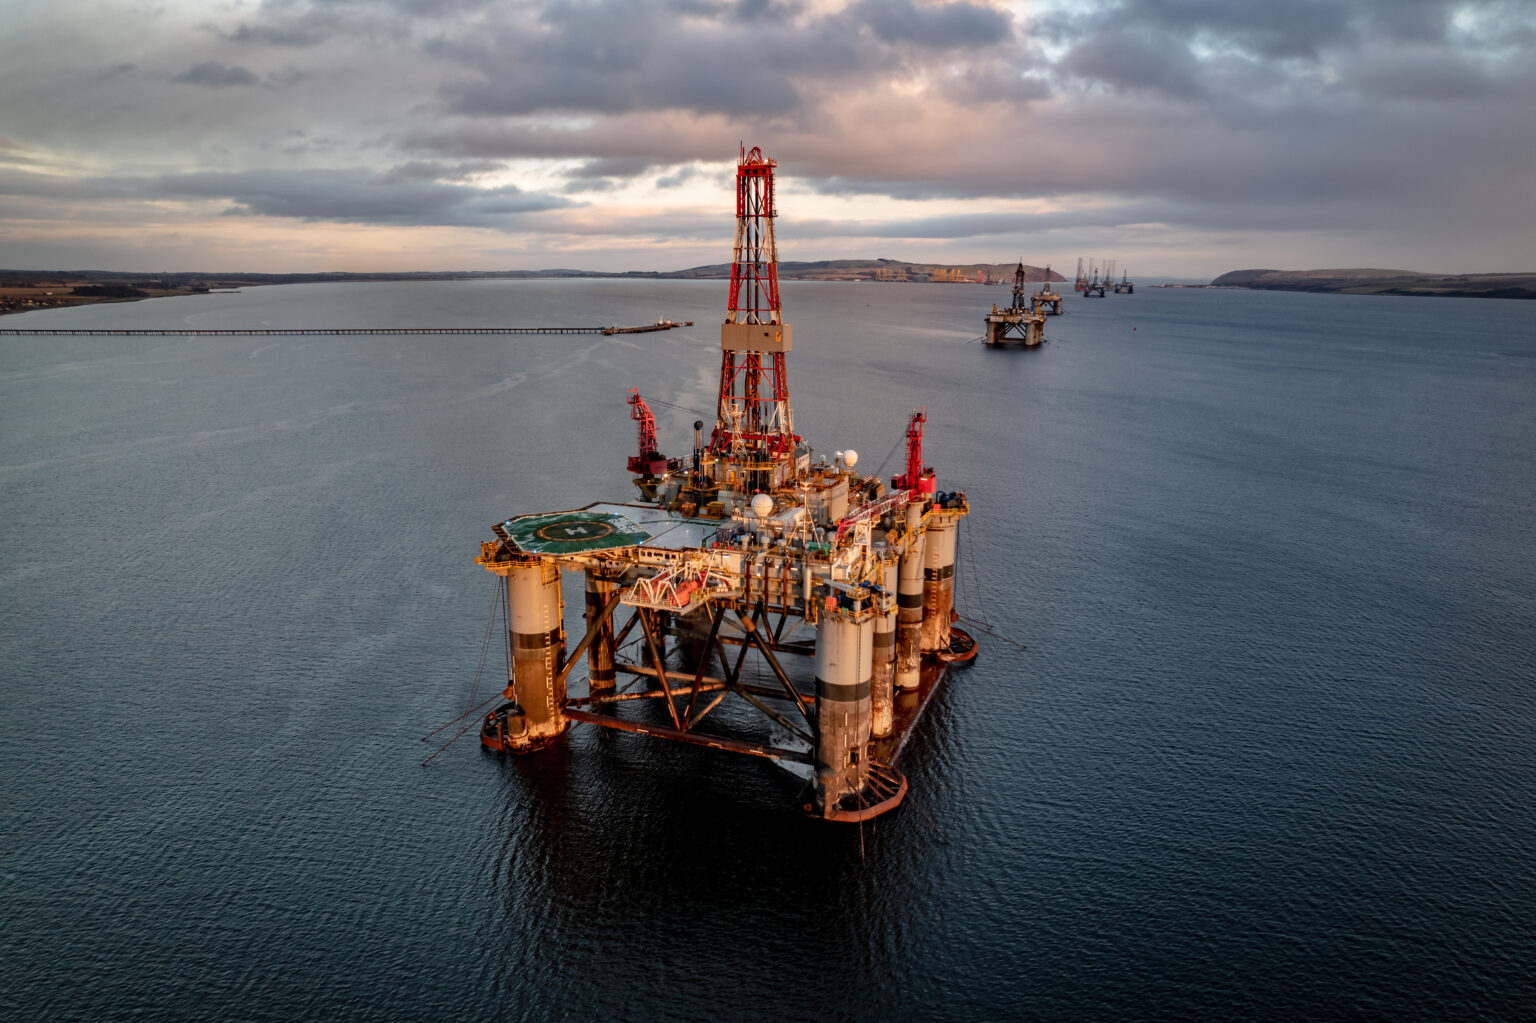 Sunset View of an Oil and Gas Rig and Platform at Sea